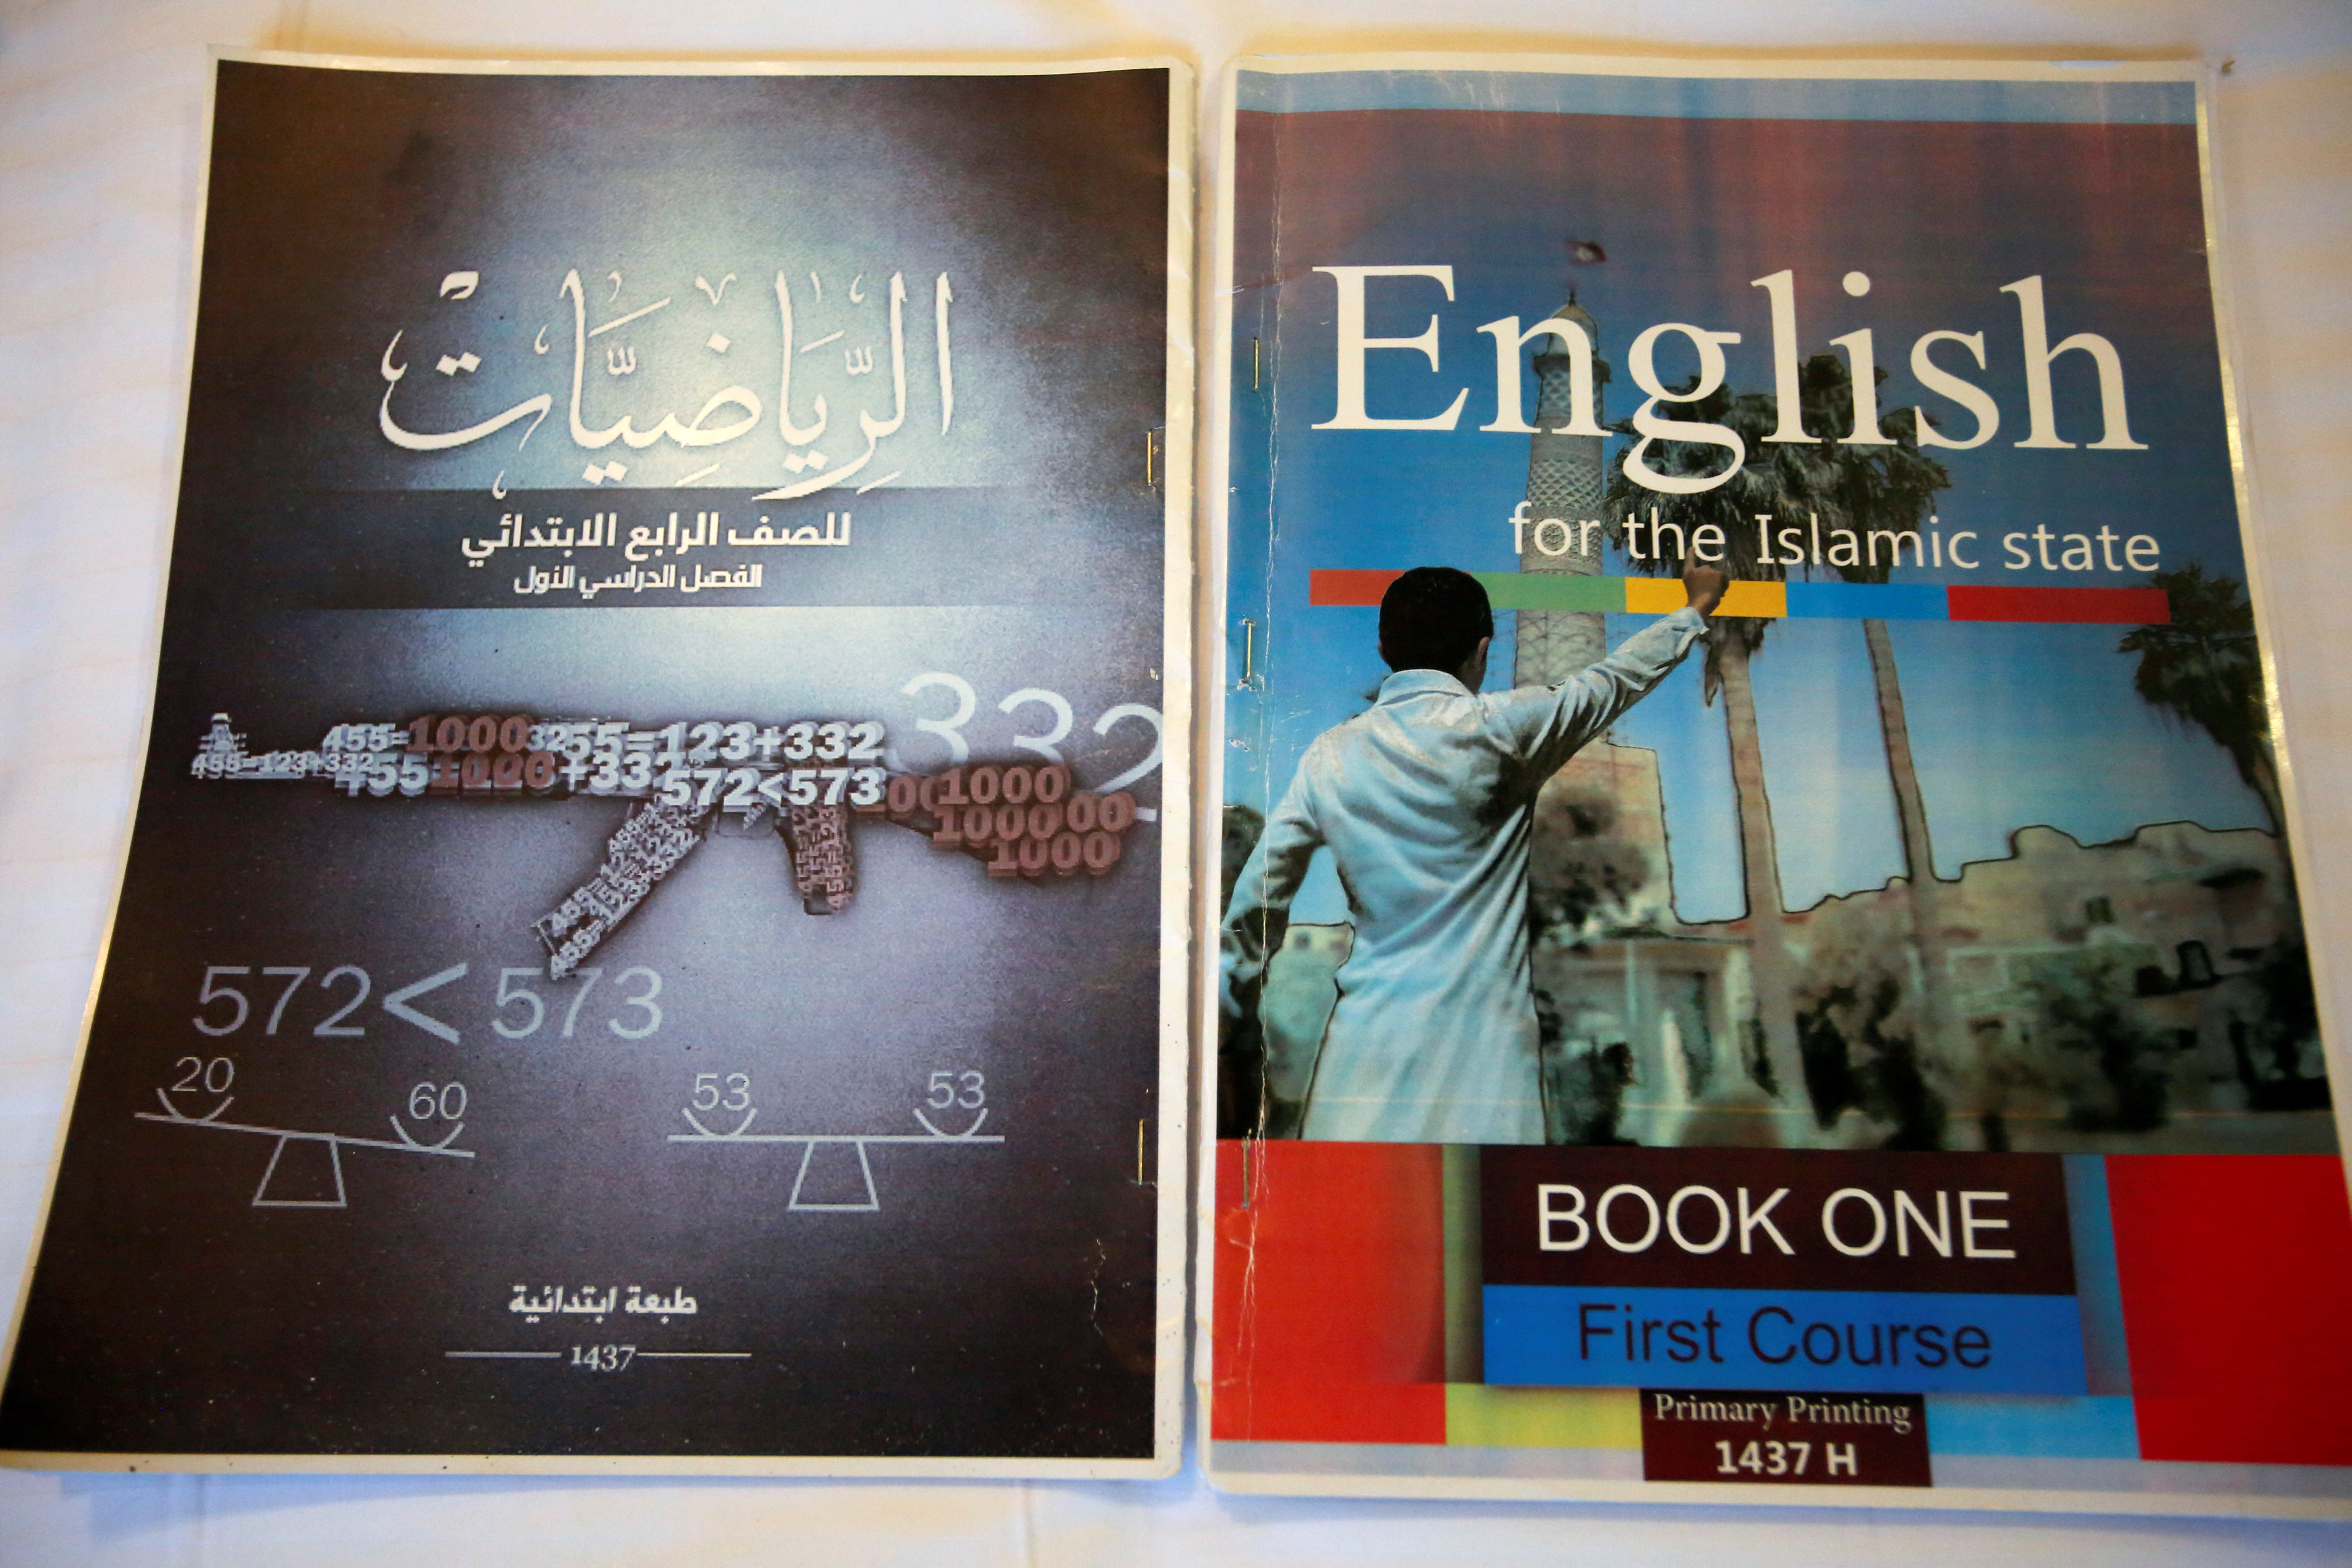 Math and English textbooks, which include military imagery, found in an Islamic State facility for child fighters are pictured in Mosul, Iraq, on February 16, 2017. Source: Khalid al Mousily/Reuters.